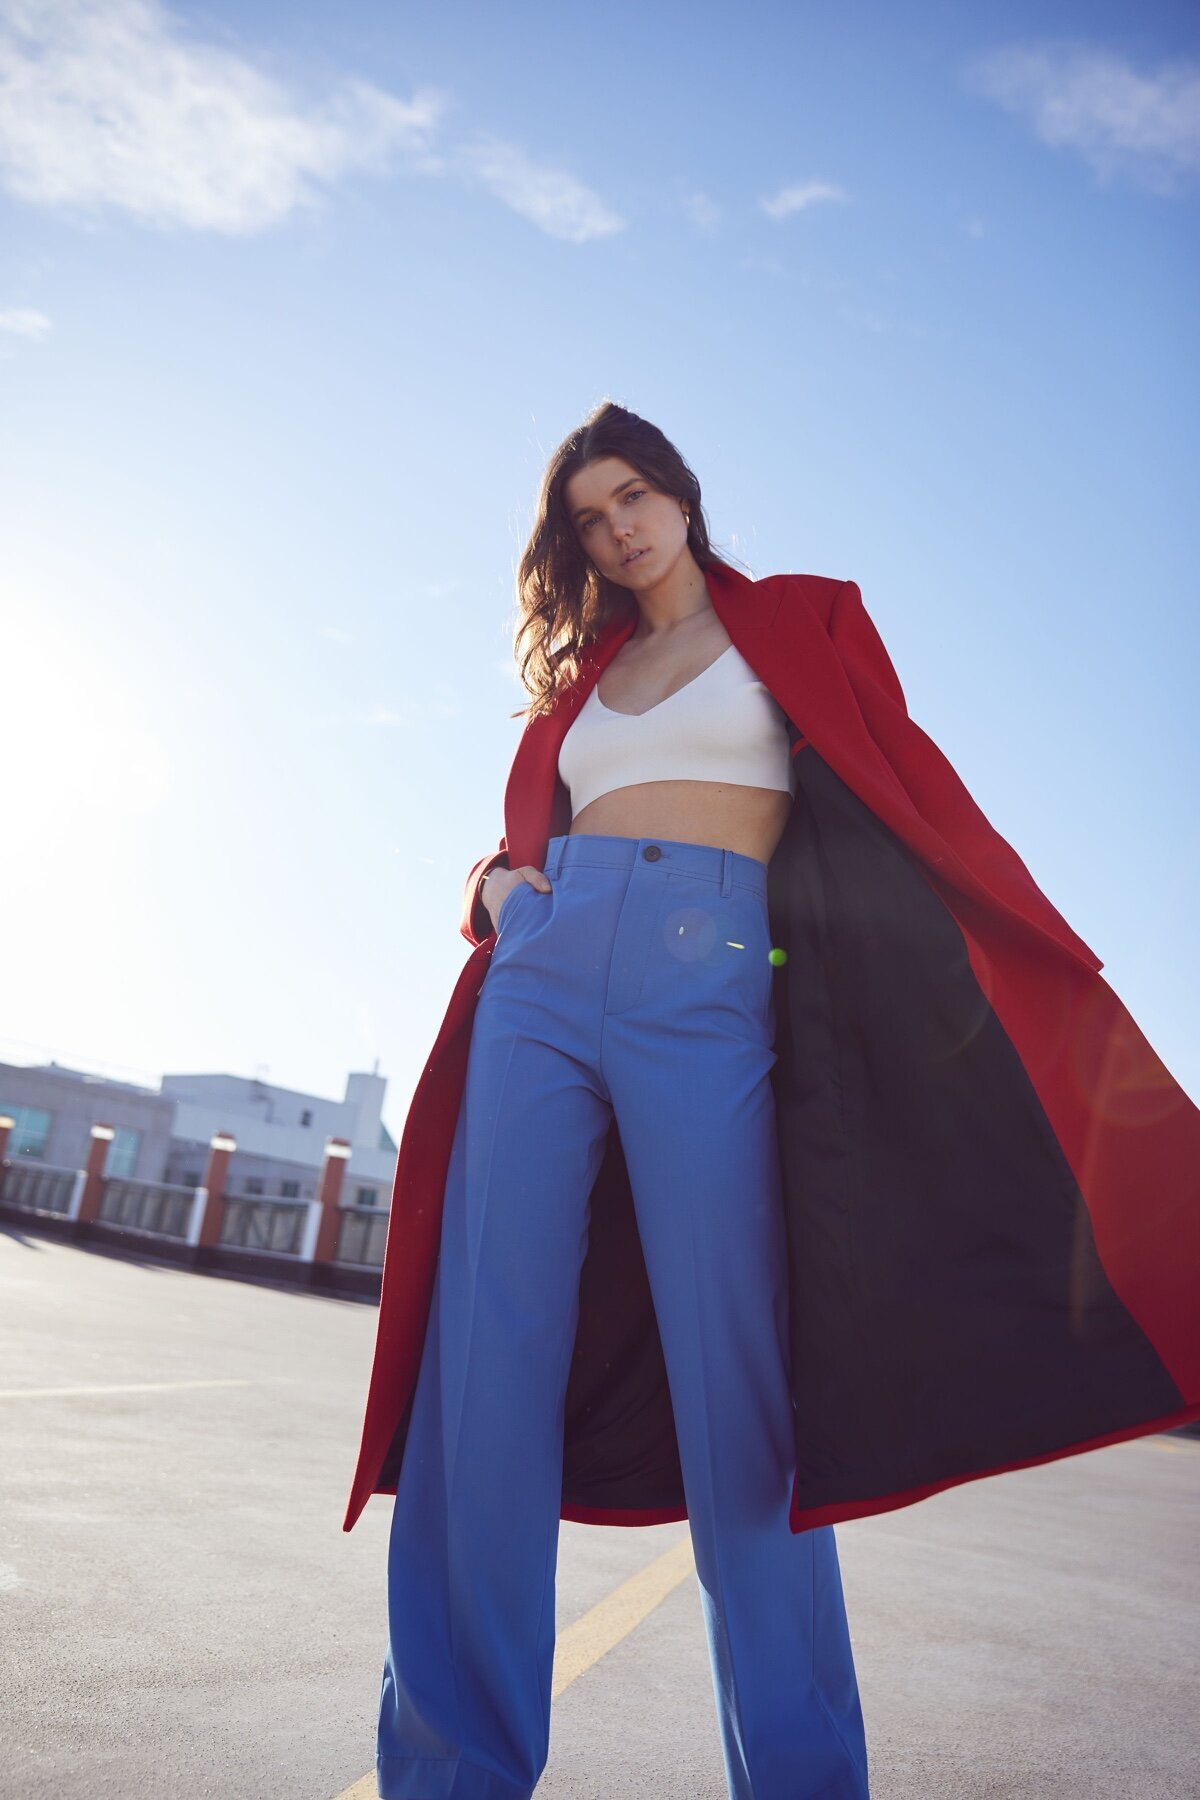 Picture of woman on rooftop in blue pants and red coat